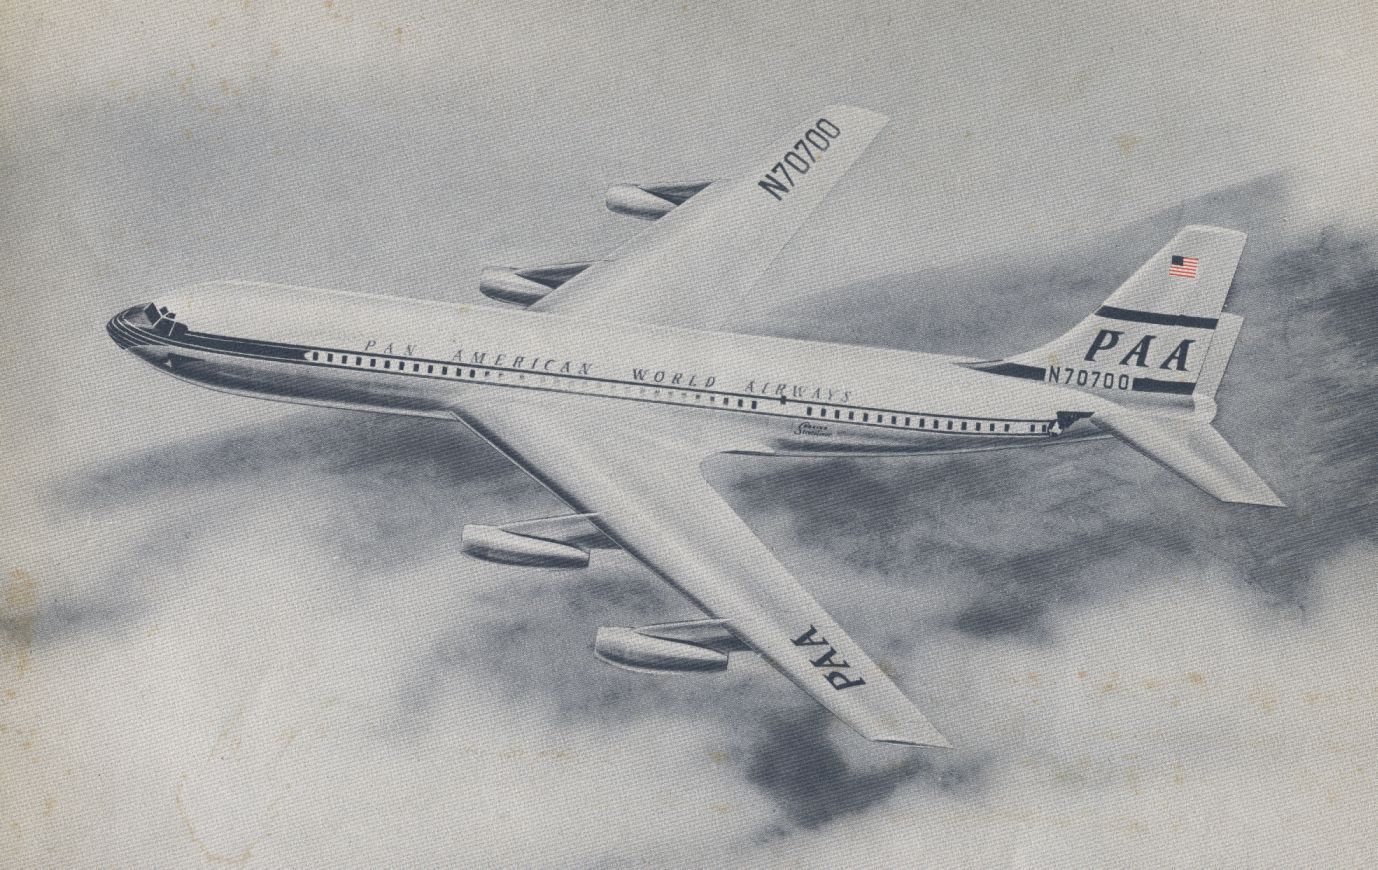 1950s Artist rendition of a Boeing 707 in the piston  livery.  The blue globe livery was adopted prior to the arrival of Pan Am's first jets.